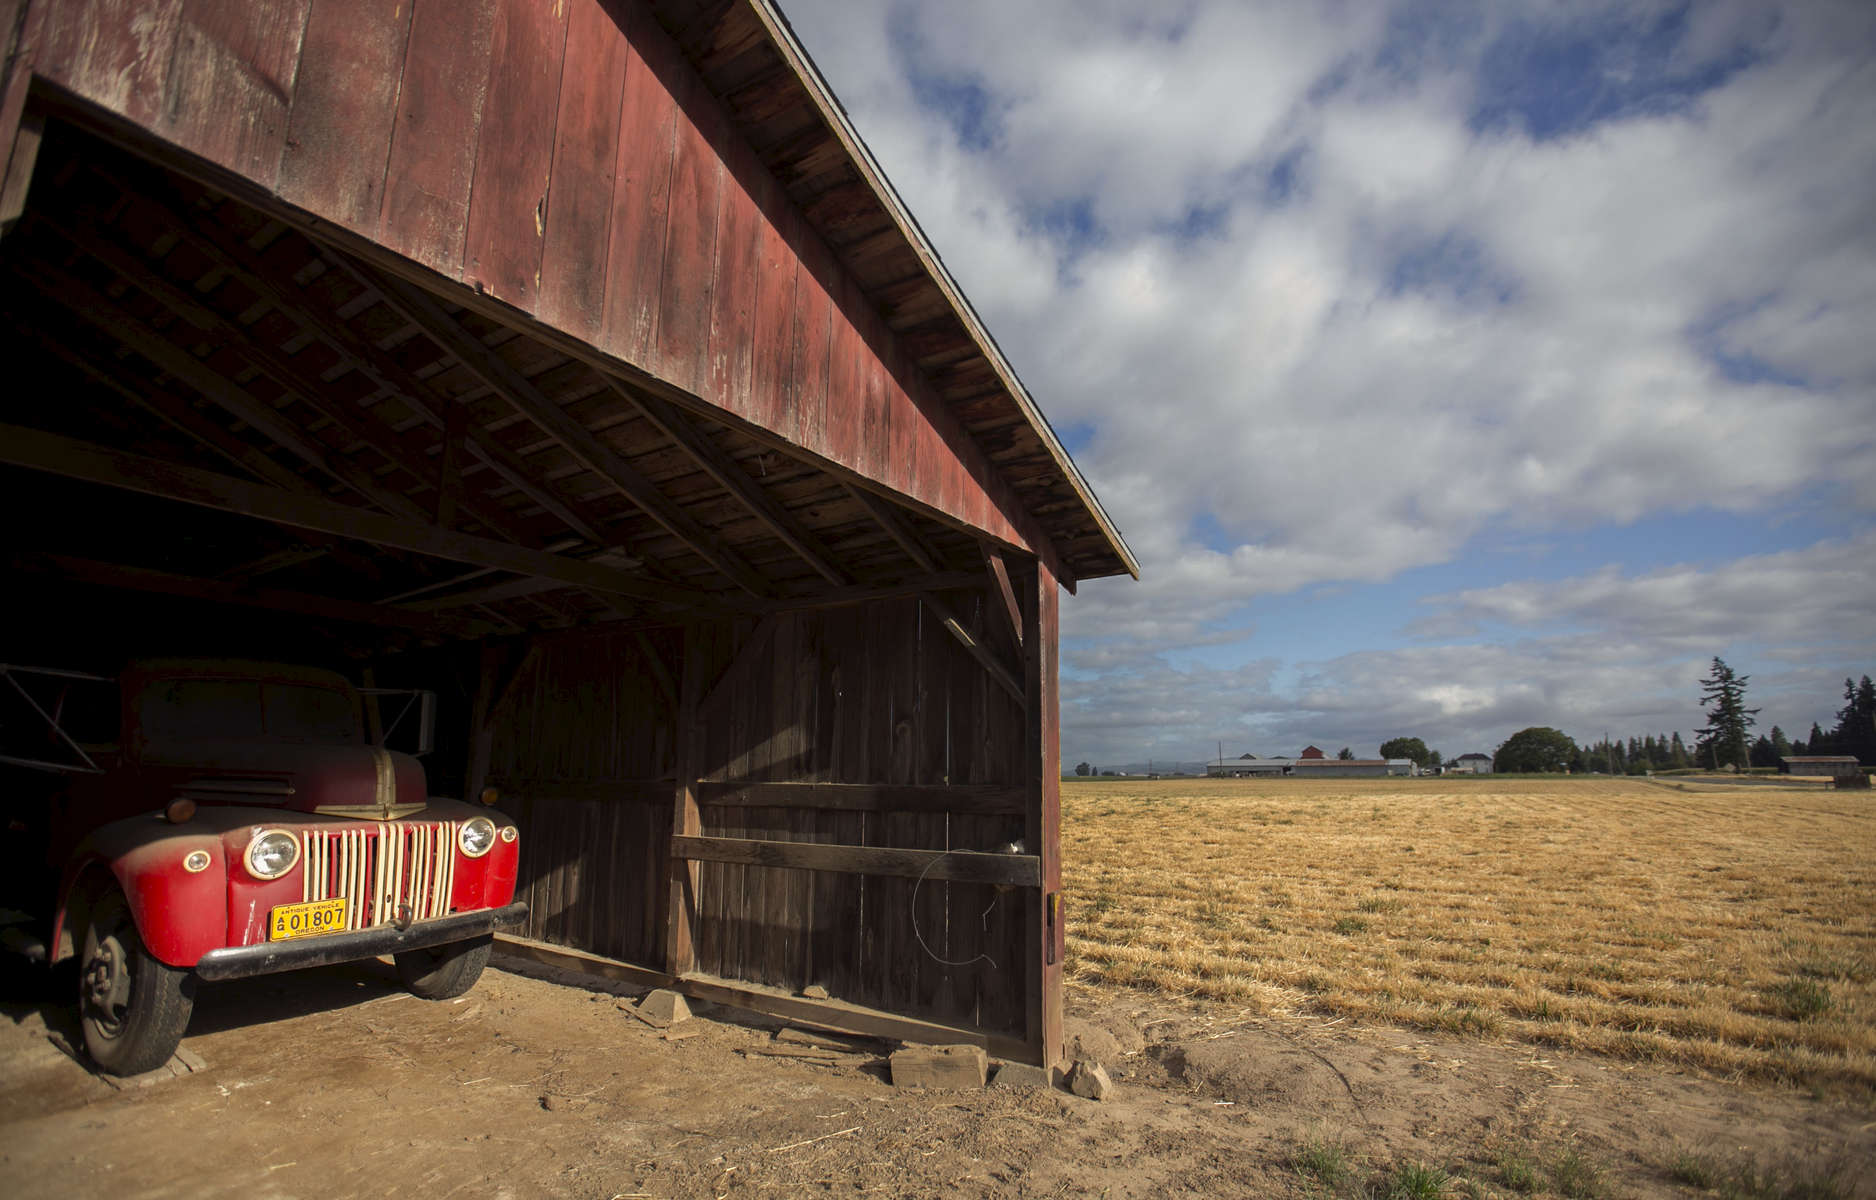 The chicken barn is now only used for storage, one of many outbuildings on the 1915 Taghon farm in Cornelius, founded in by Theophile Cappoen, and is now owned by Theophile's great-great-grandson Joe Finegan and his wife Jennifer.  